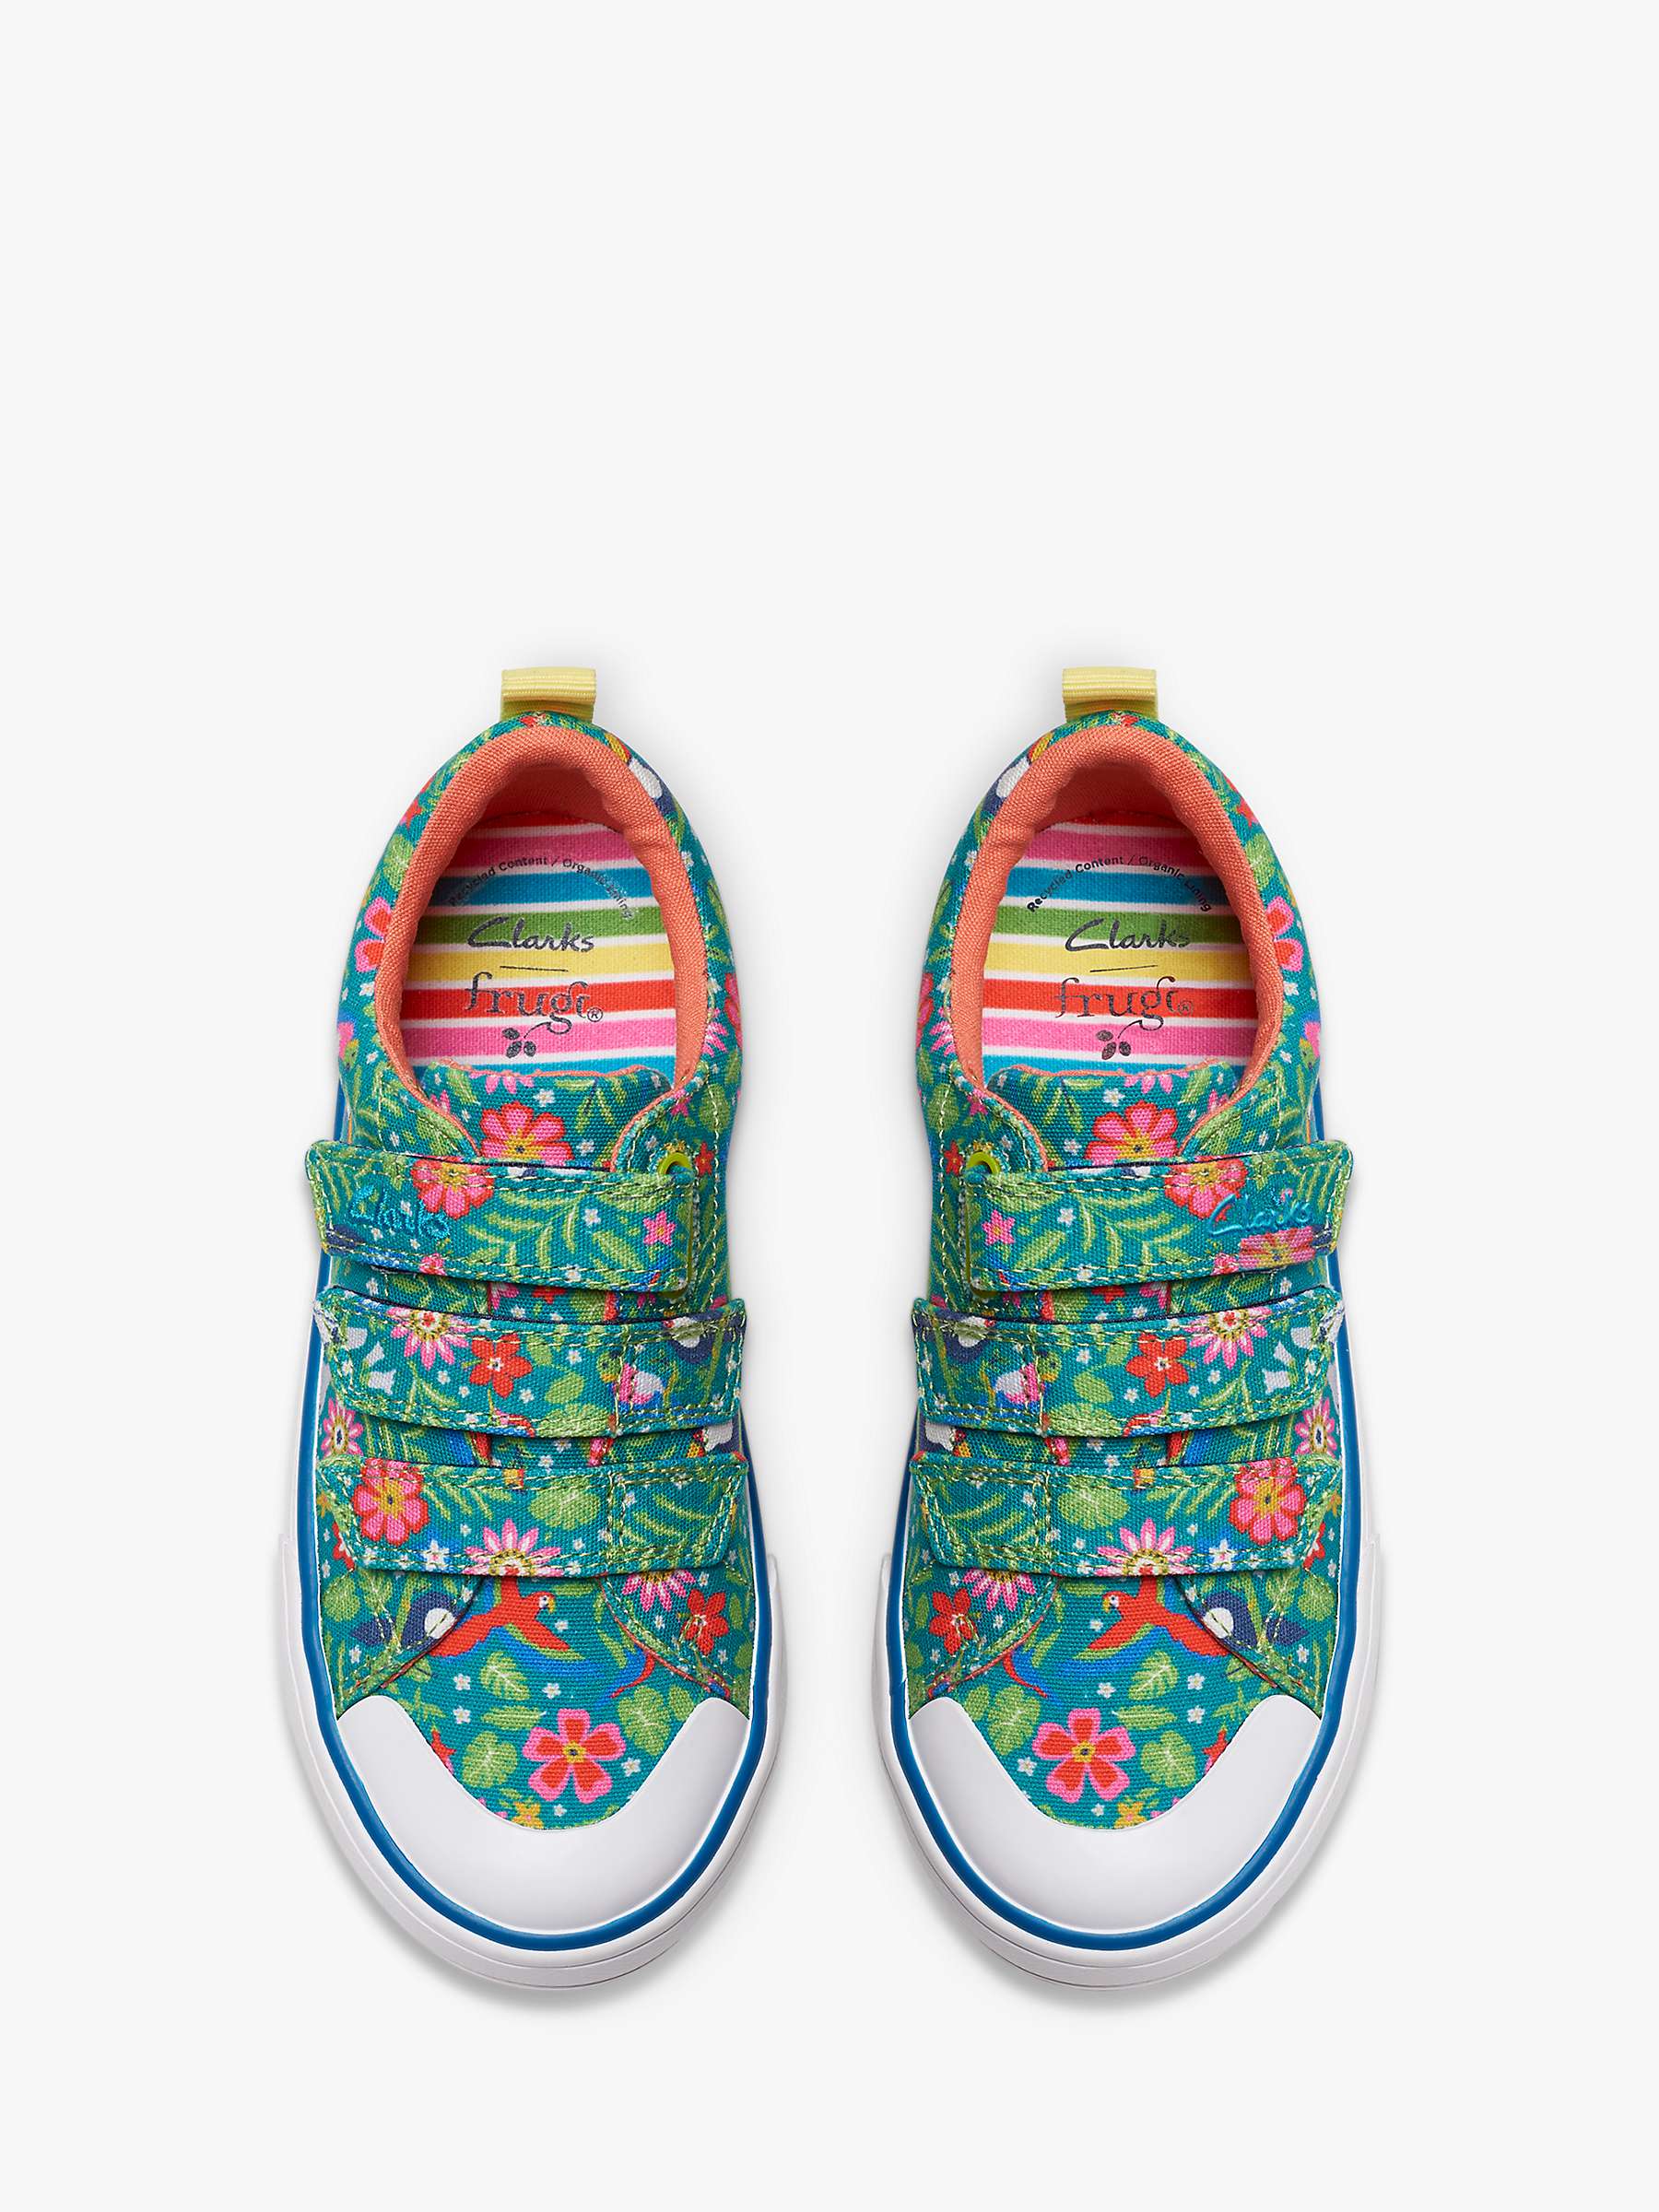 Buy Clarks Kids' Clarks x Frugi Foxing Tropic Trainers, Green Online at johnlewis.com